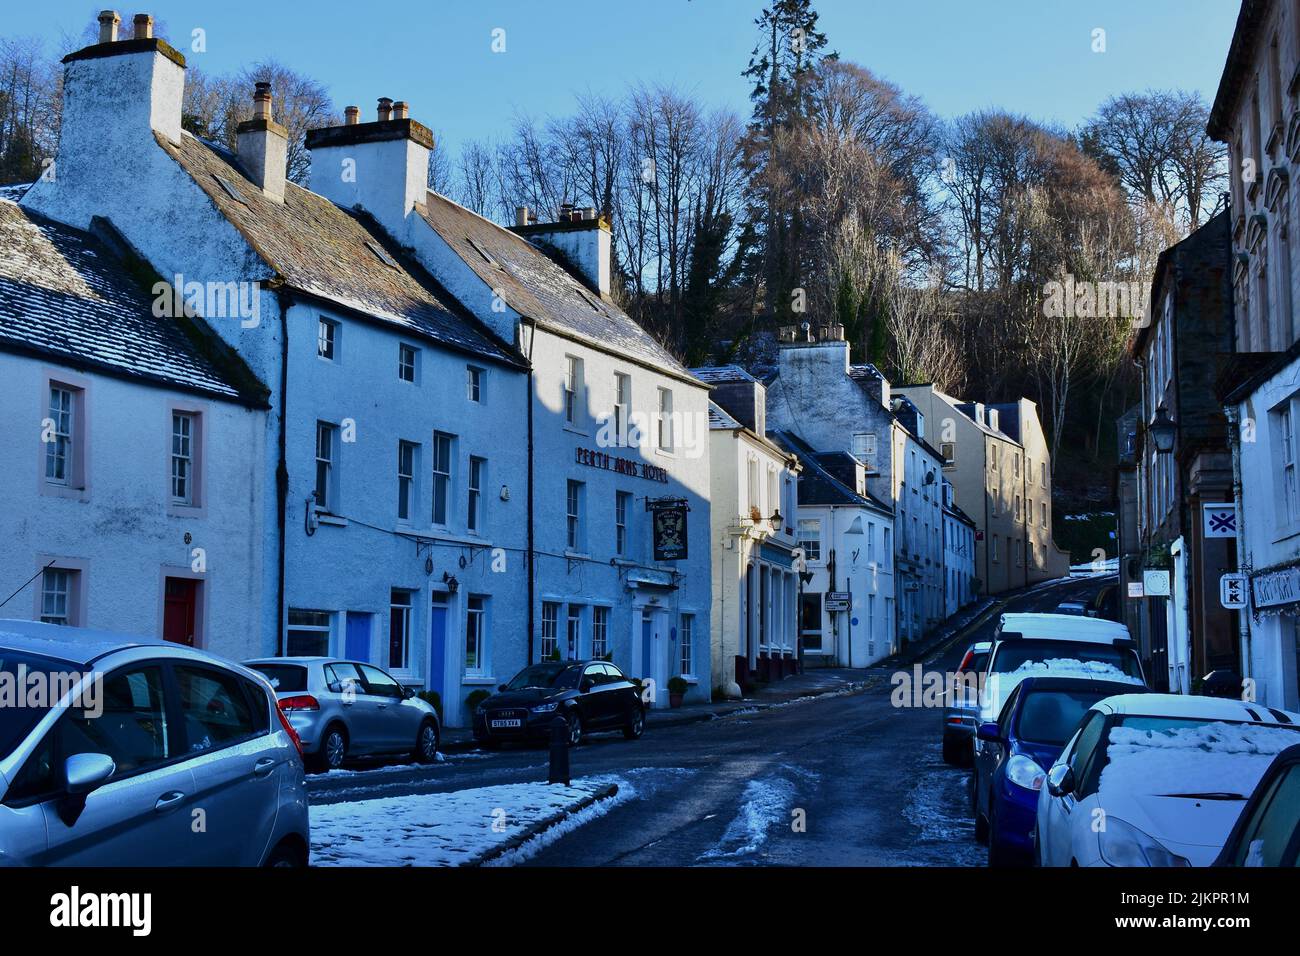 A winter view along High Street in Dunkeld with the Perth Arms Hotel in the centre. Early morning snow covers the streets. Stock Photo